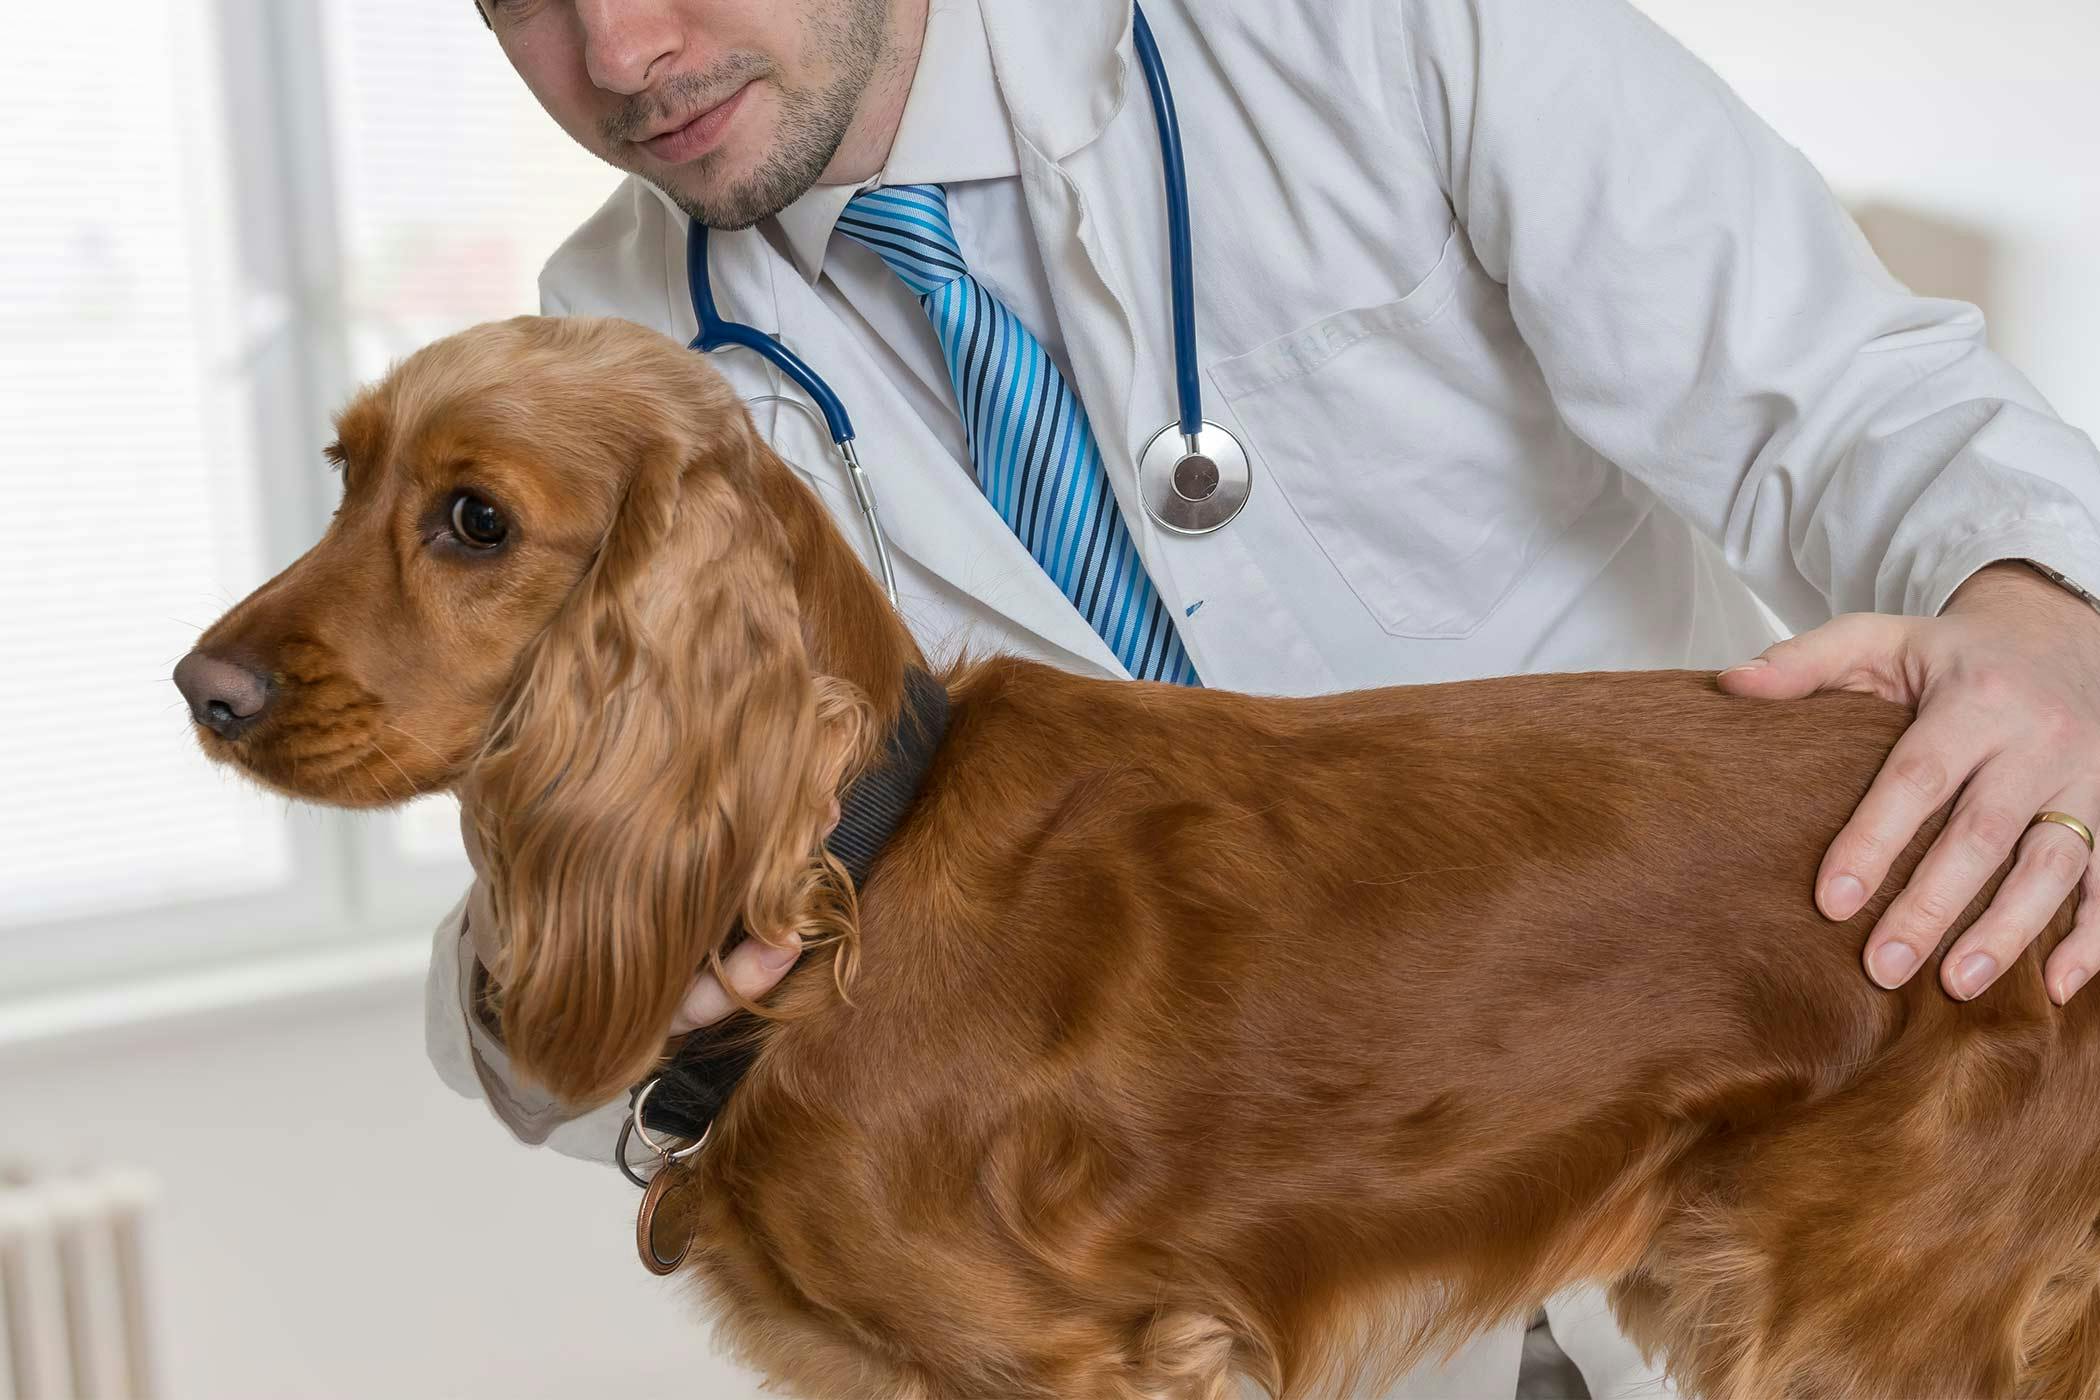 how do you treat a testicular infection in a dog